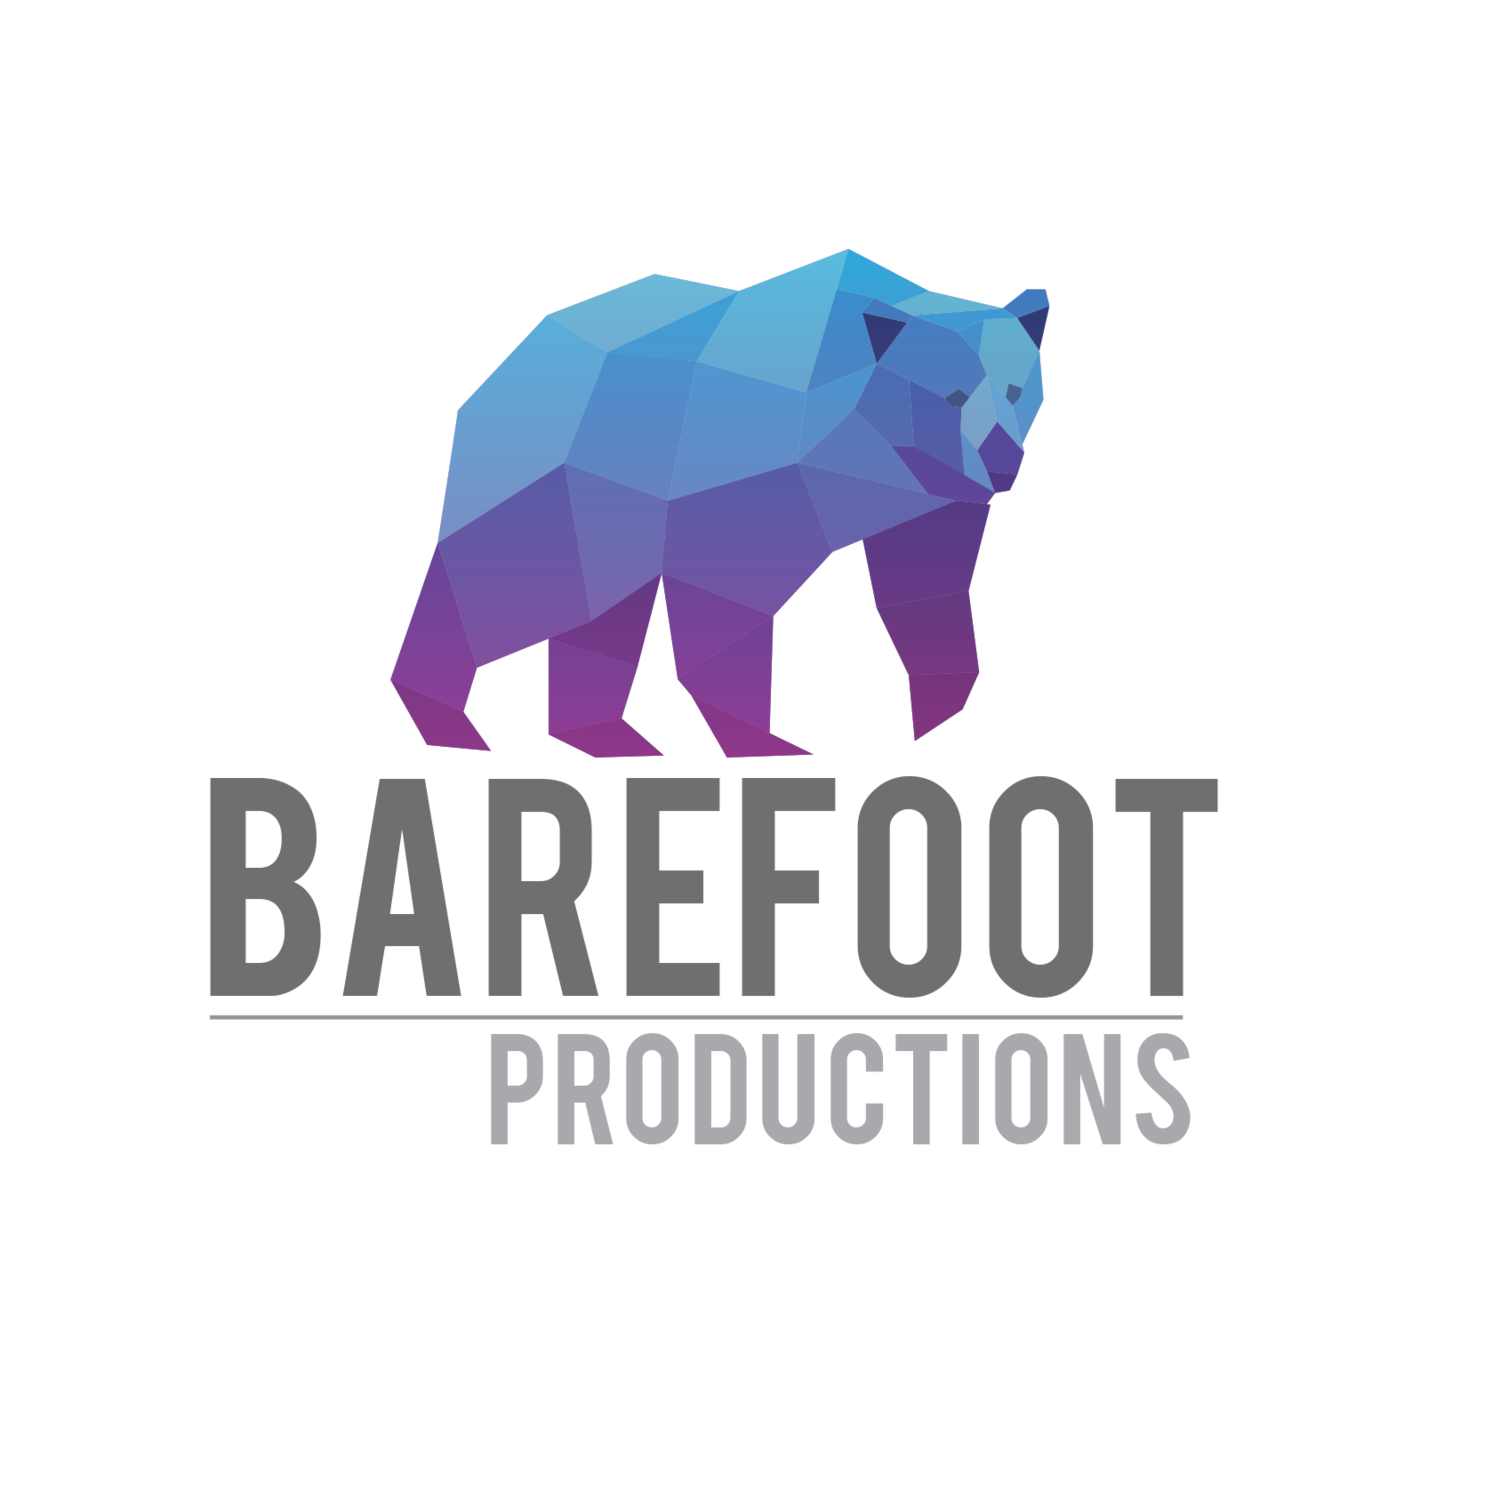 BAREFOOT PRODUCTIONS